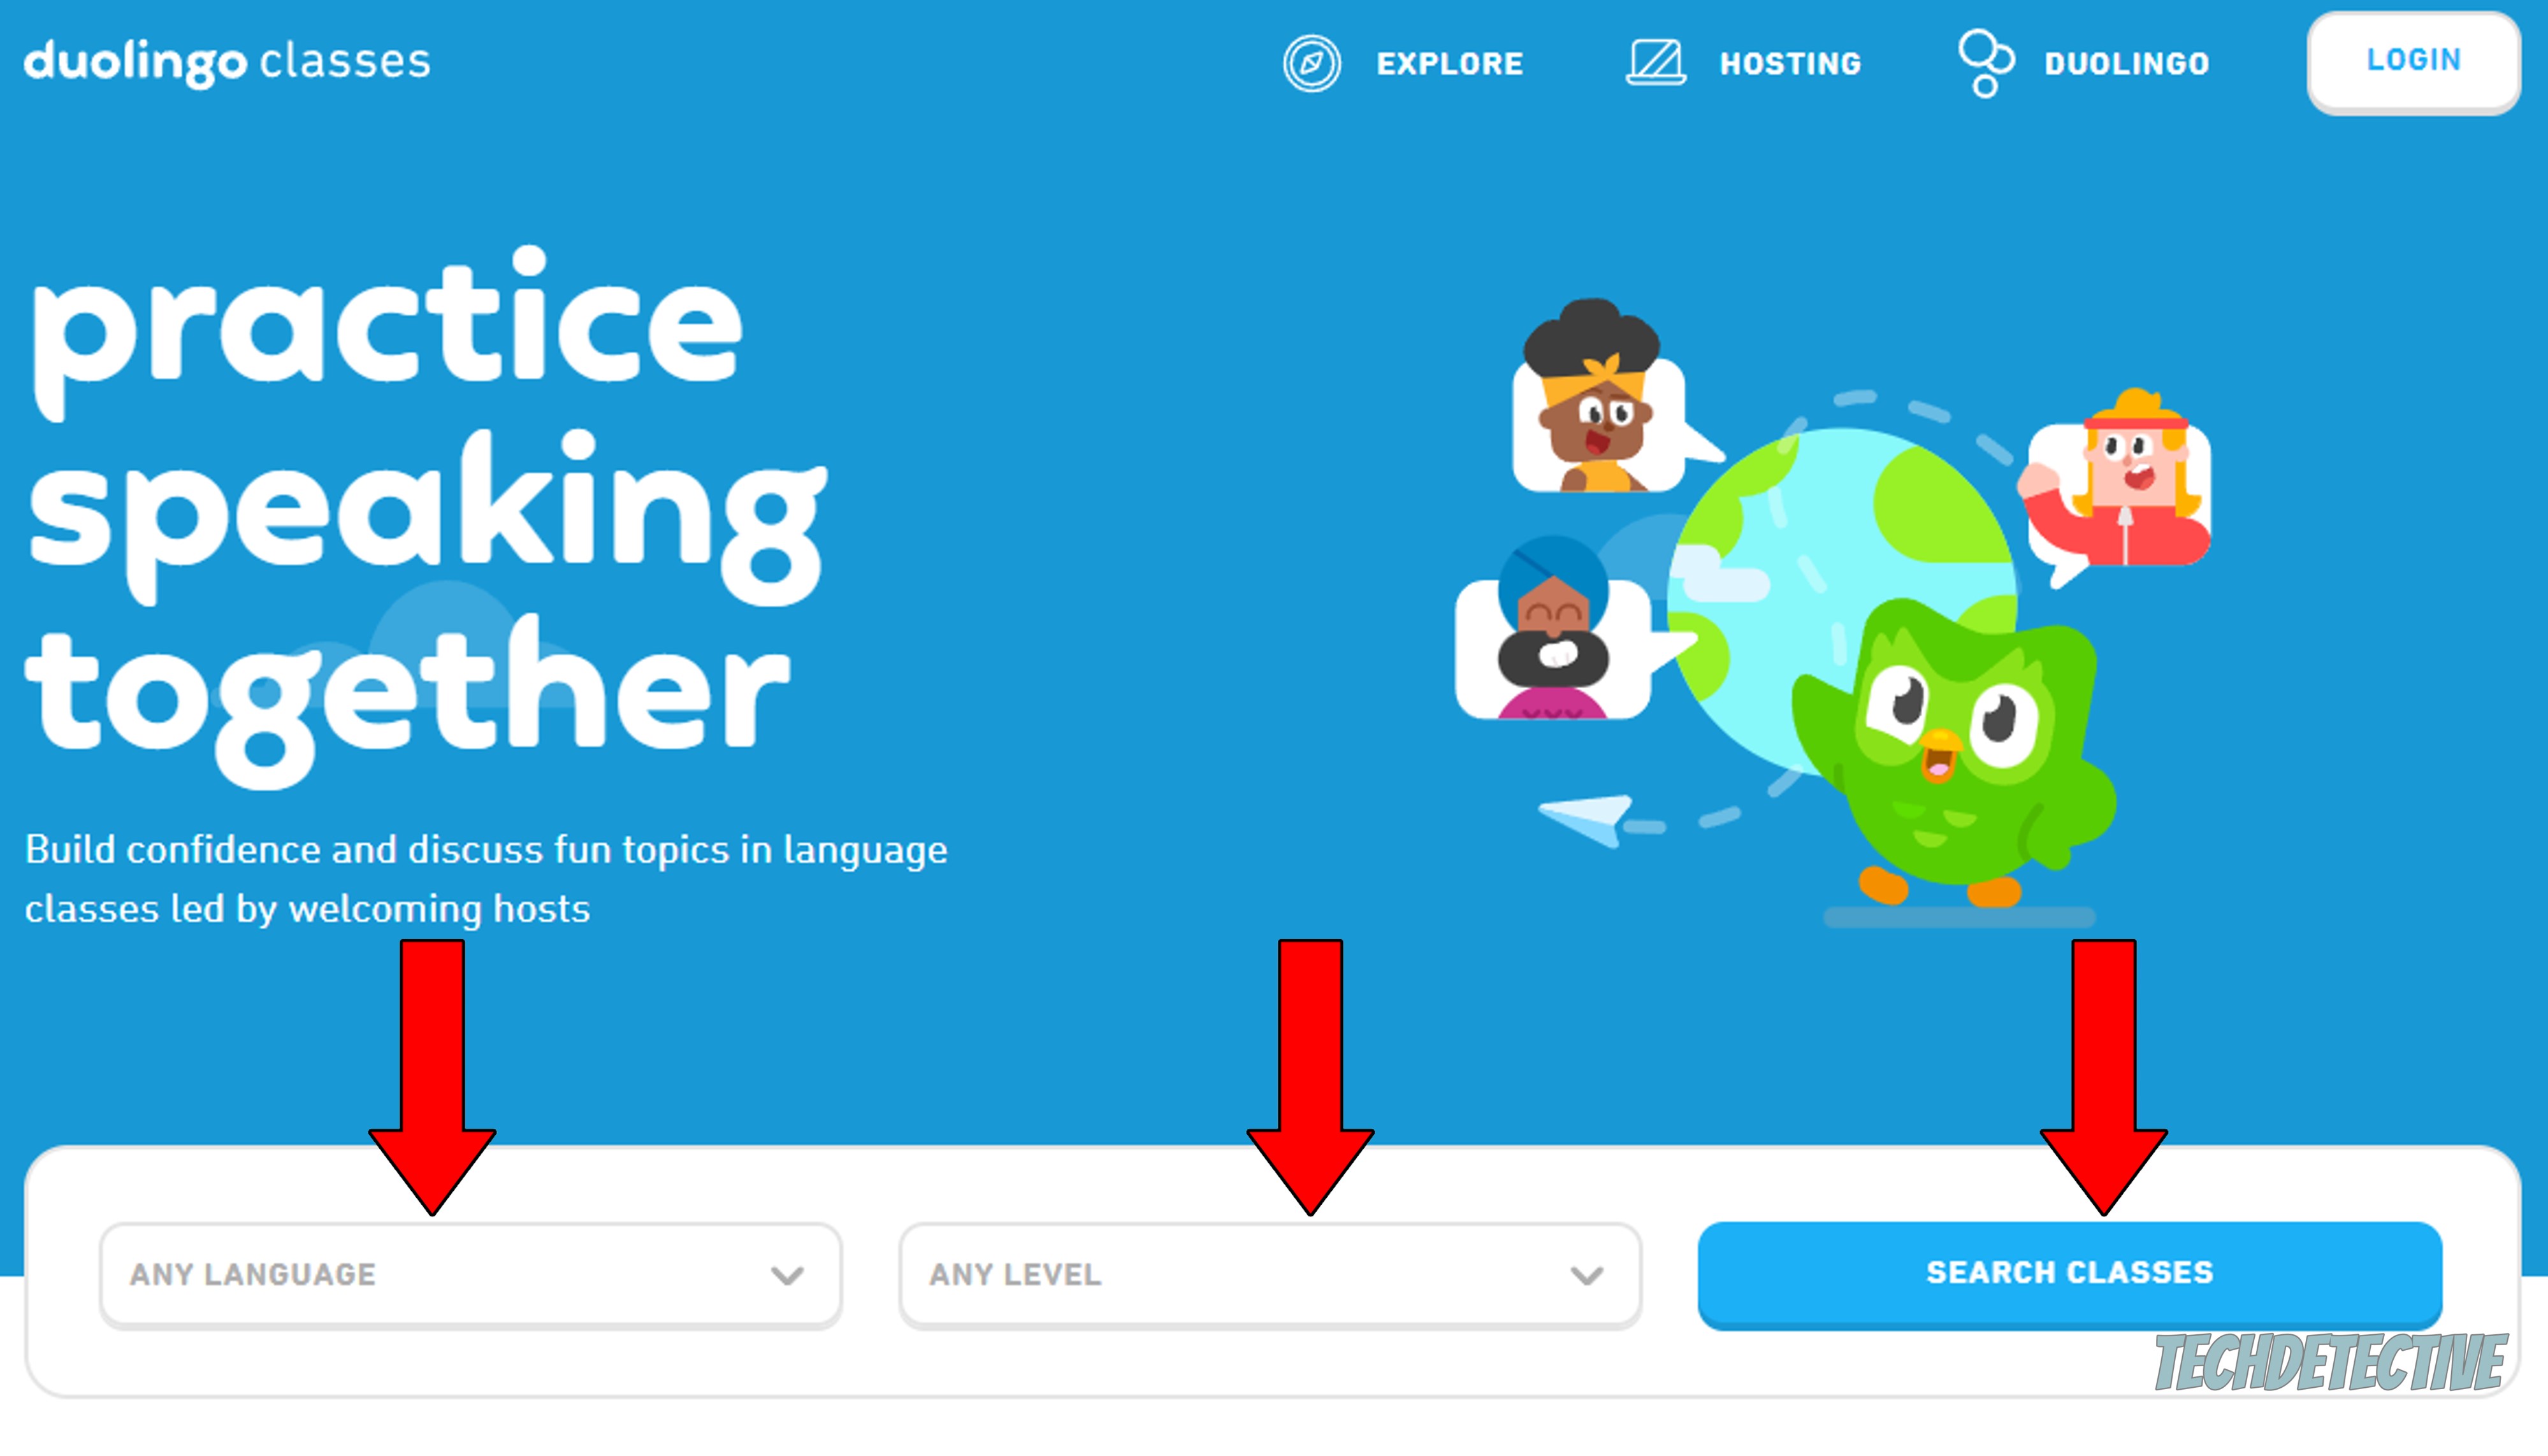 How to look for classes on Duolingo